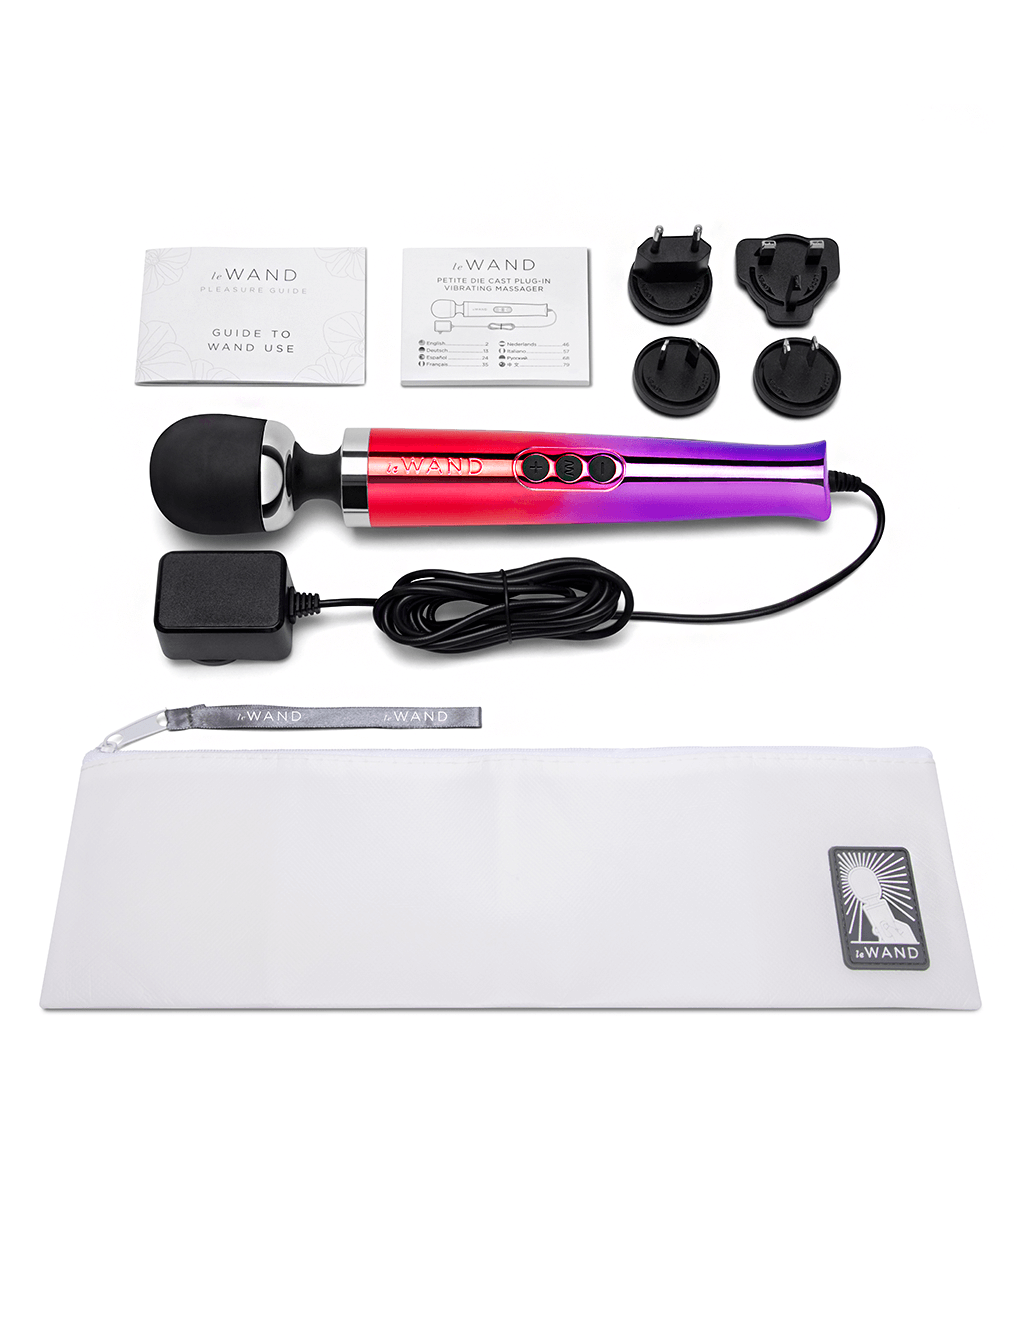 Le Wand Diecast Plug-In Vibrating Wand - Ombre - Box Contents